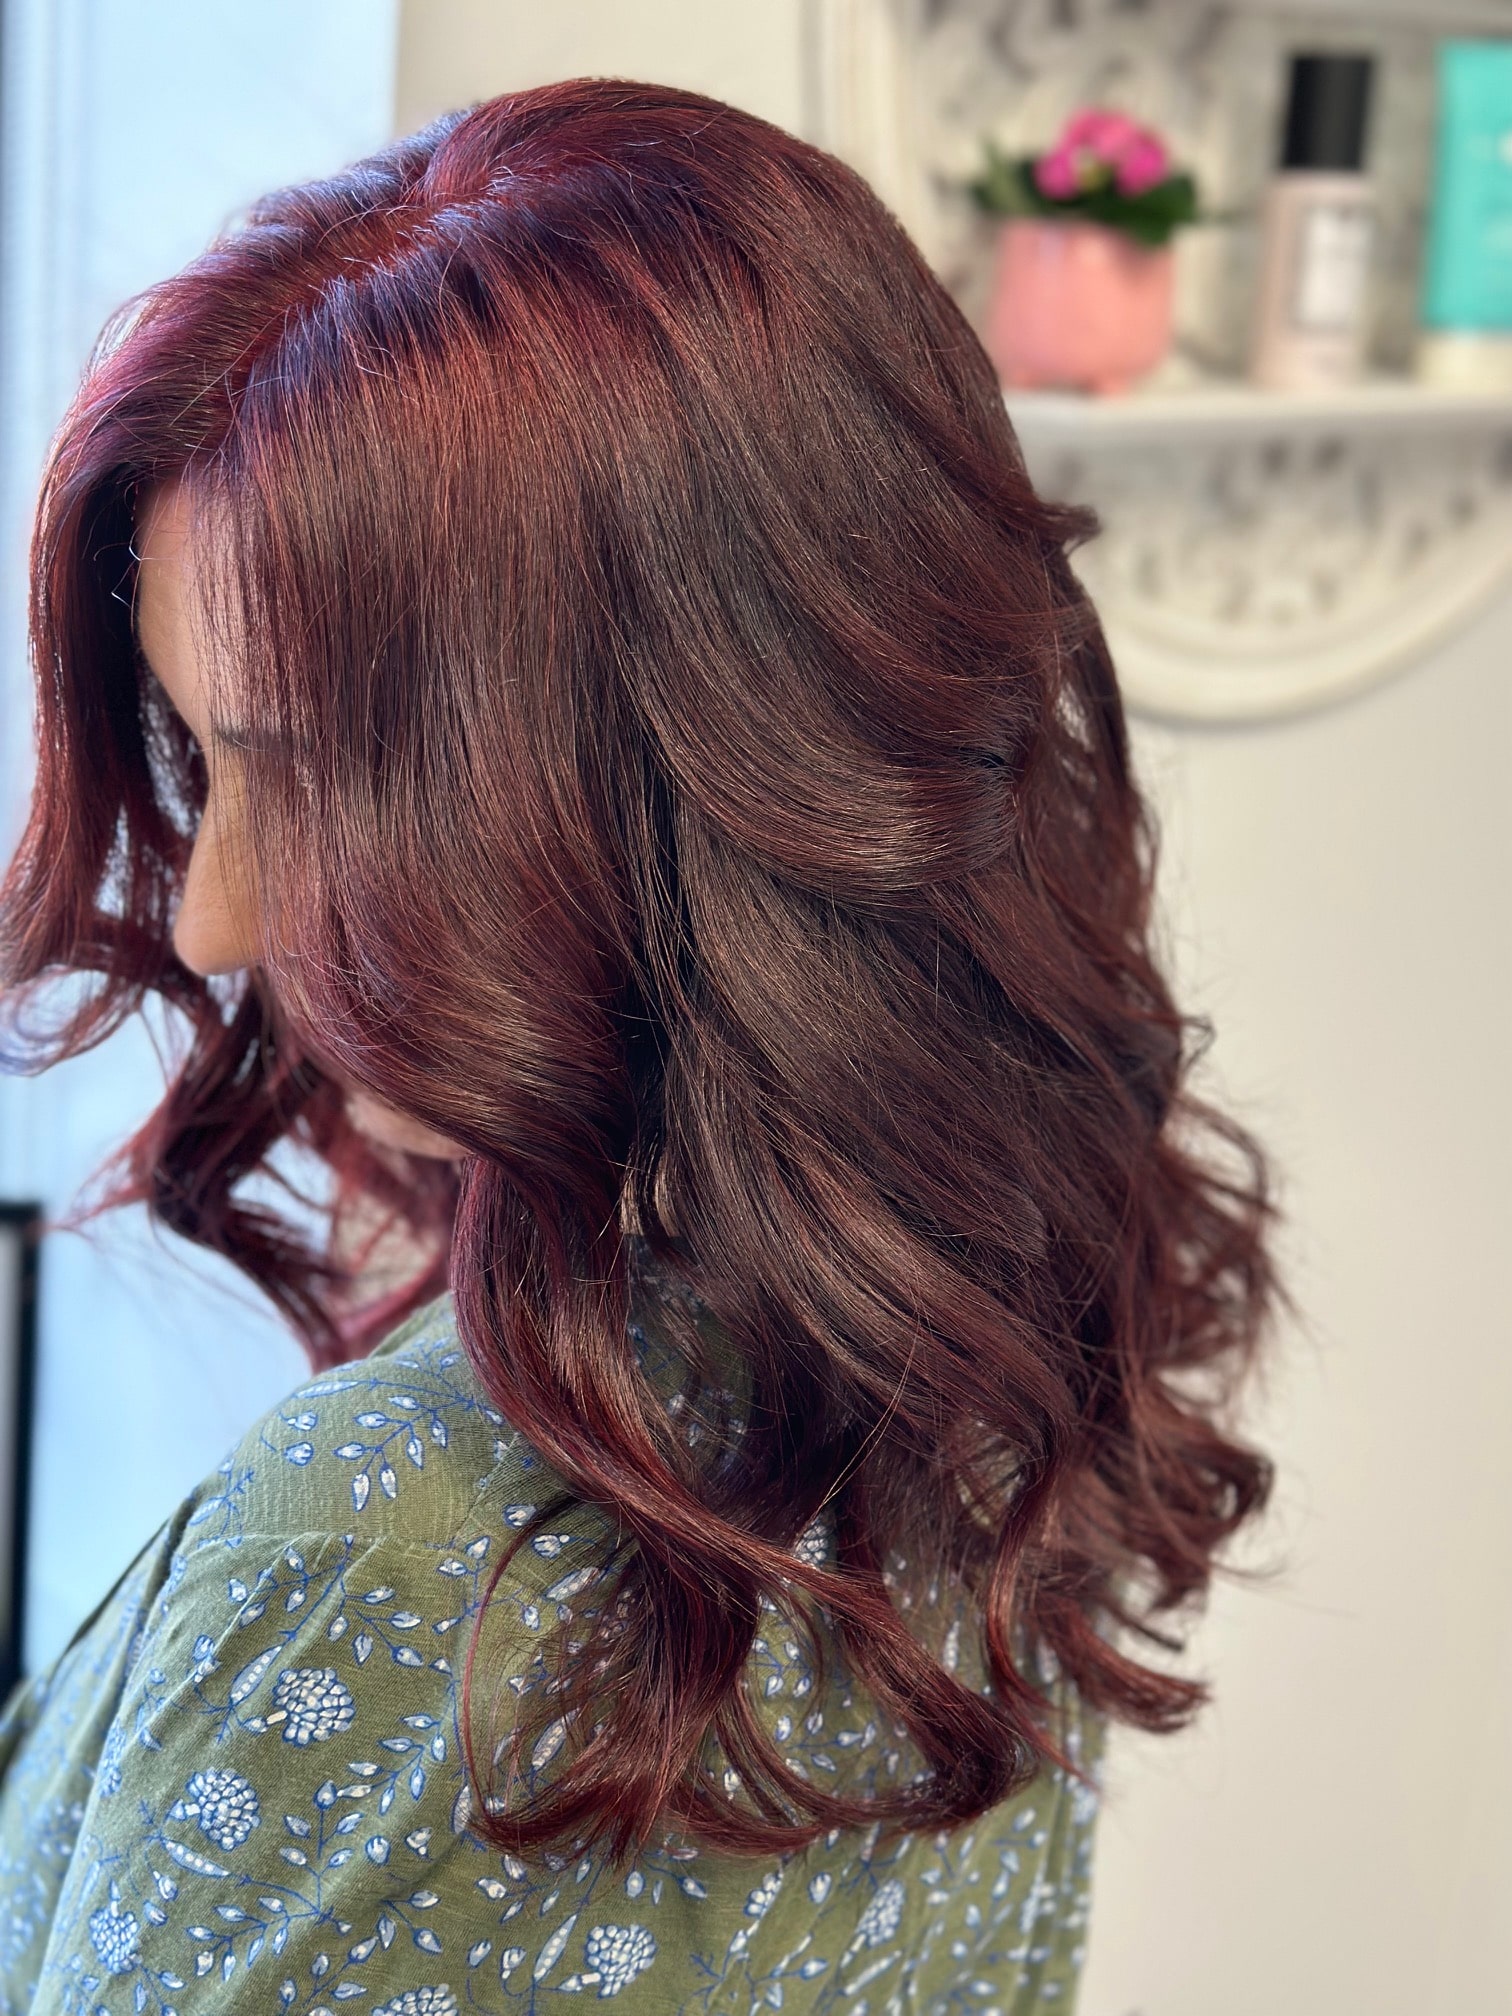 It's all about Red - Red Color Service Dedham Hair By Marianne